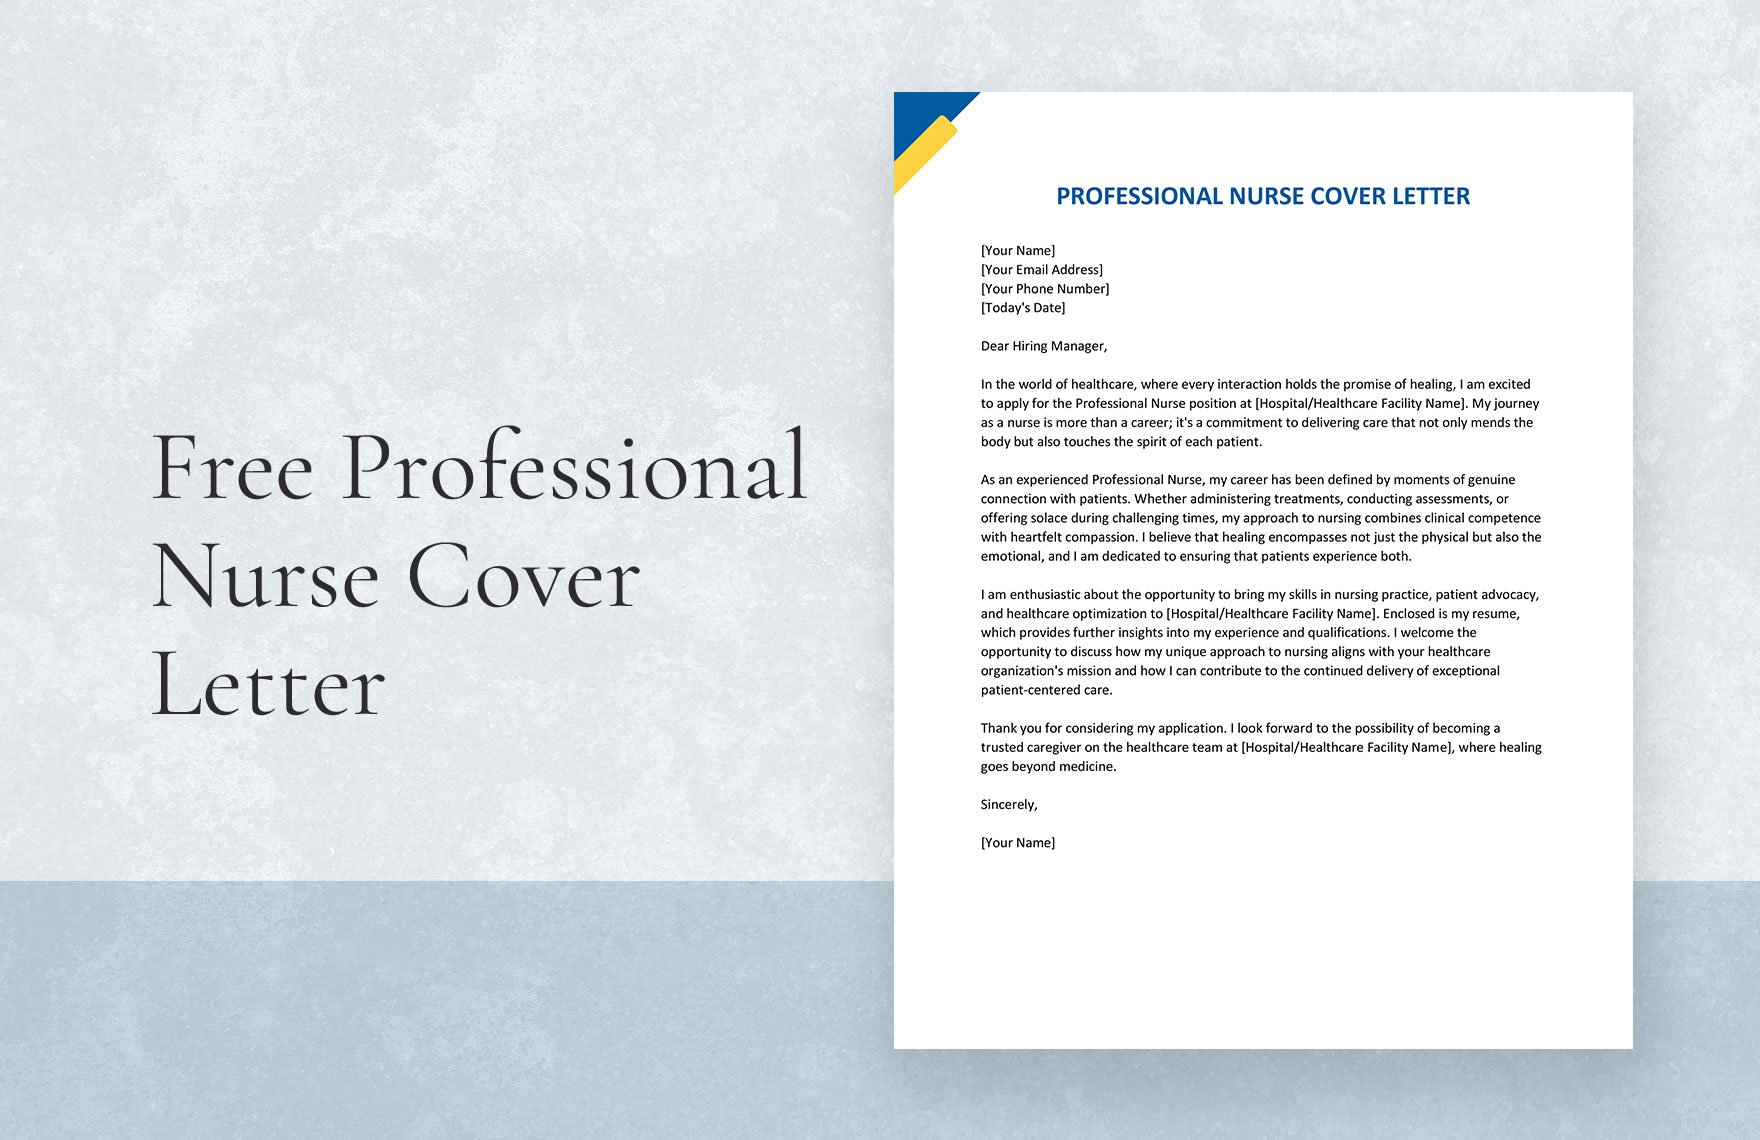 Professional Nurse Cover Letter in Word, Google Docs